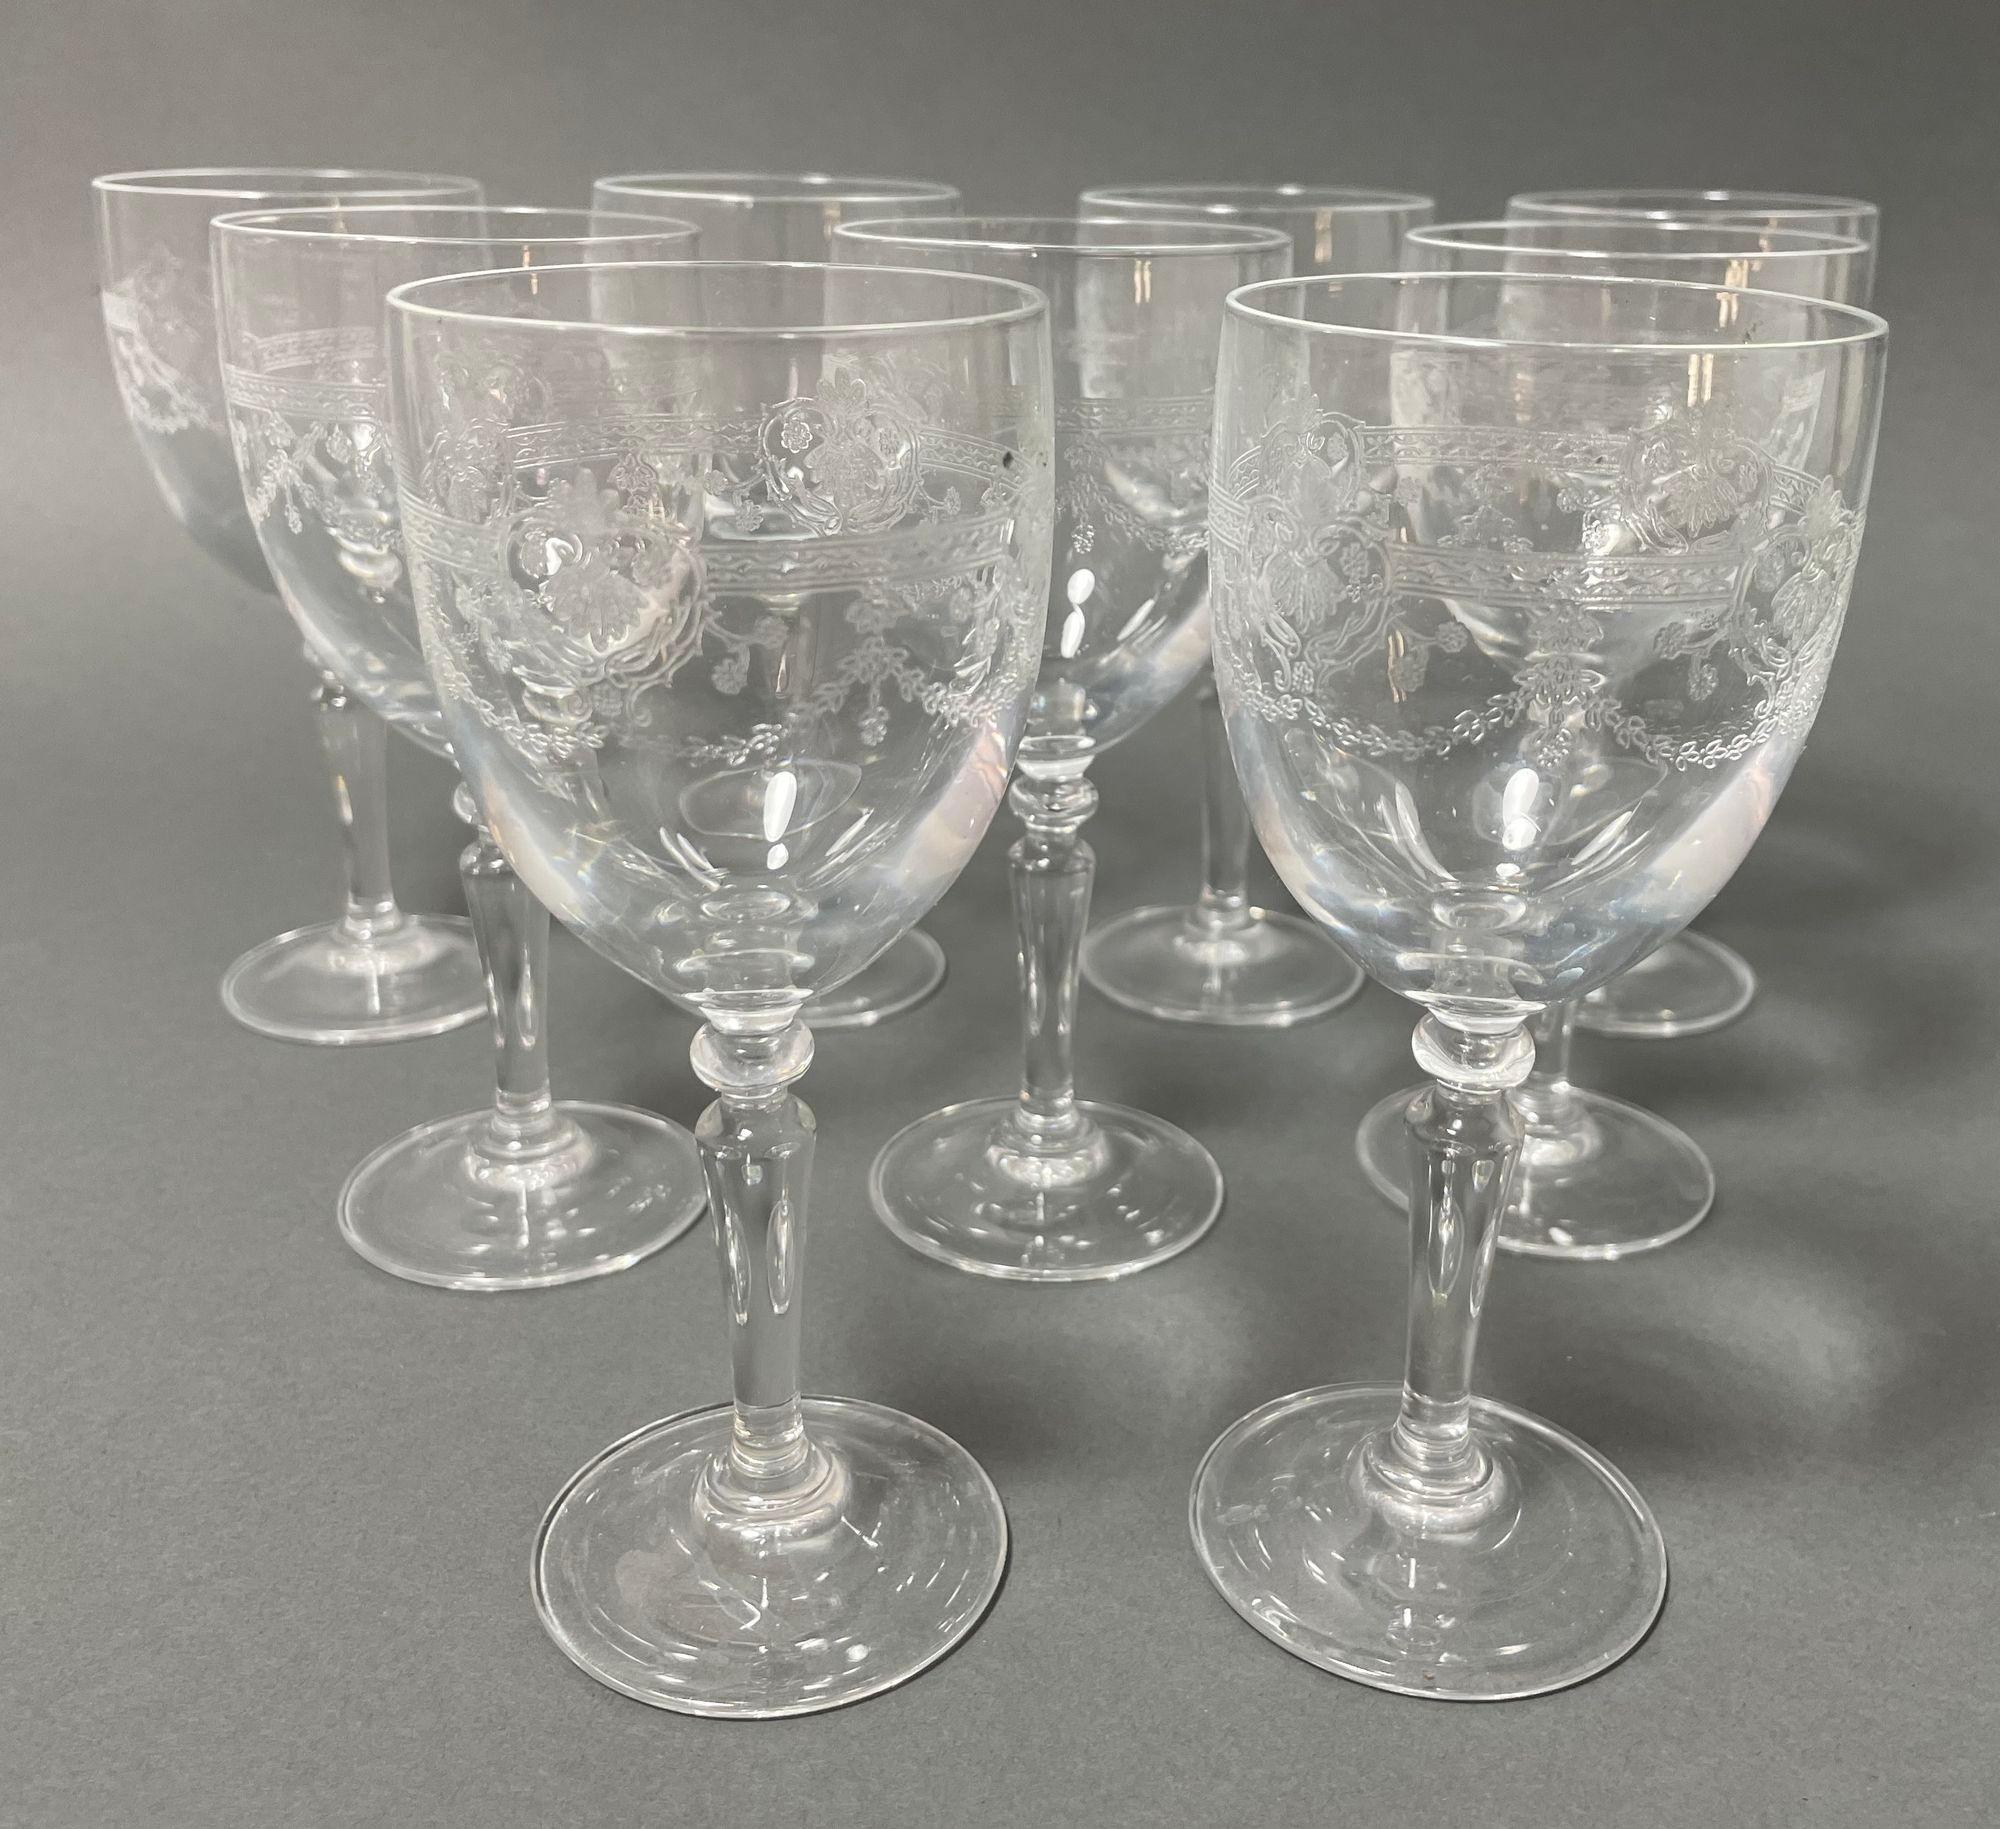 Vintage Cristal D'Arques Dampierre Etched Water WIne Goblets 5.5” Set of 9 France.
Amazing French etched crystal wine or water glasses by Cristal D'Arques.
Wine glasses by Cristal D'Arques, vintage set of 9 in box, discontinued in 1990.
Cristal